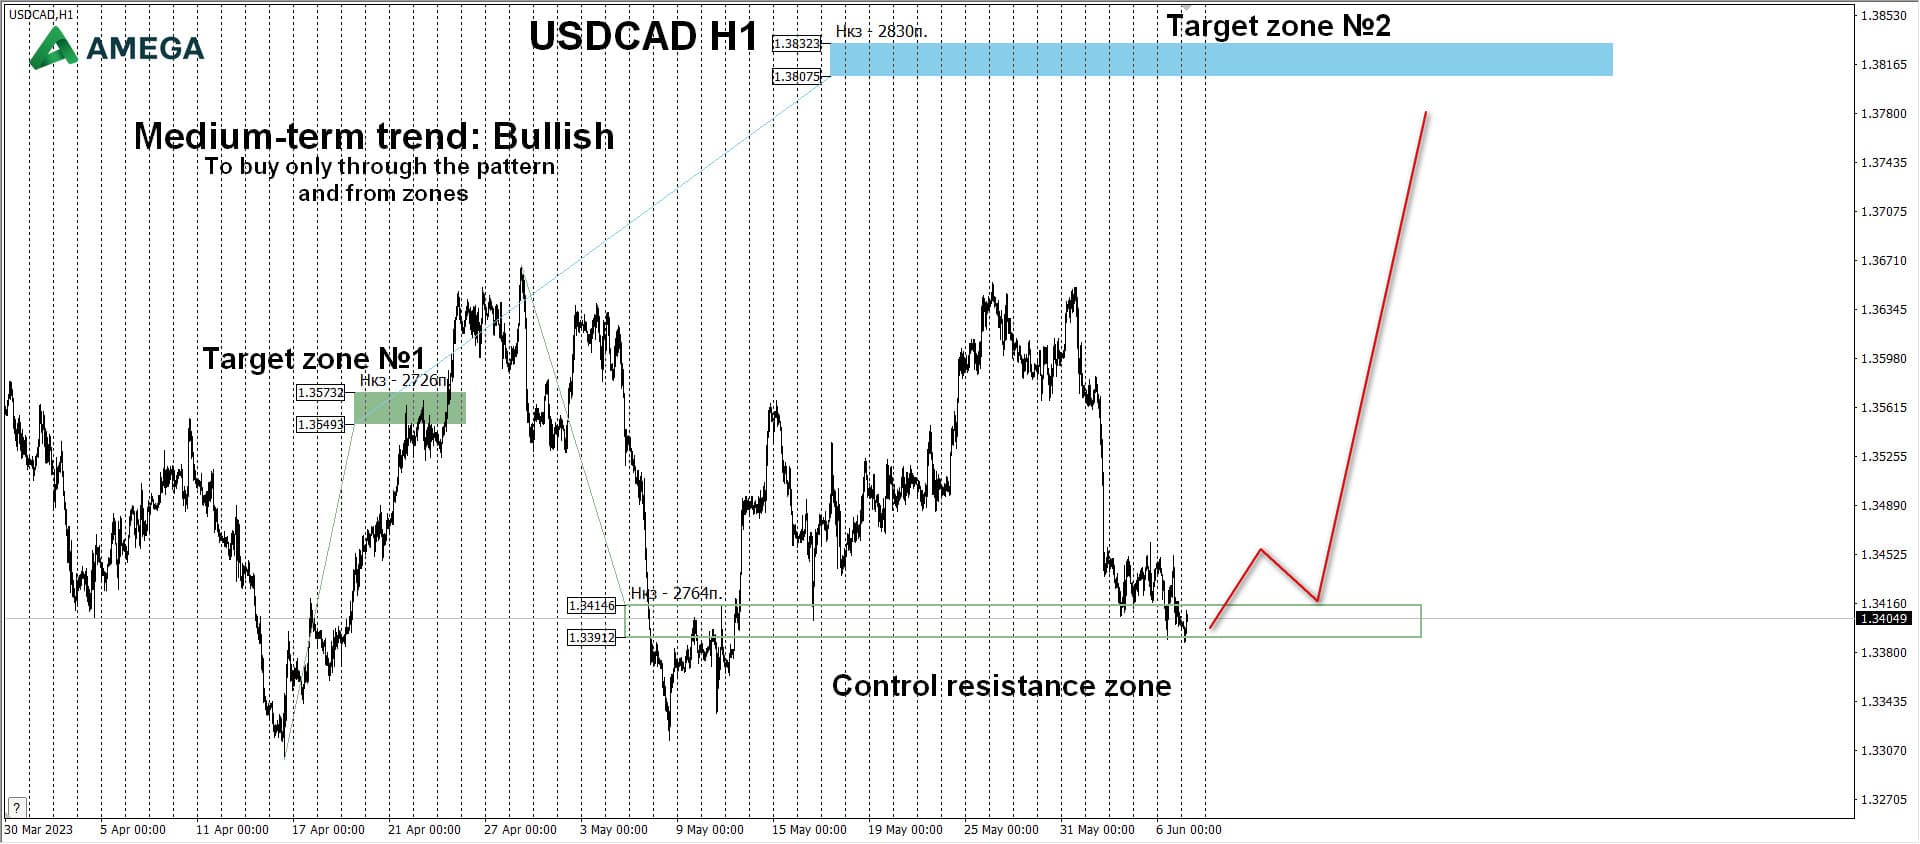 USDCAD: The bull market is continuing